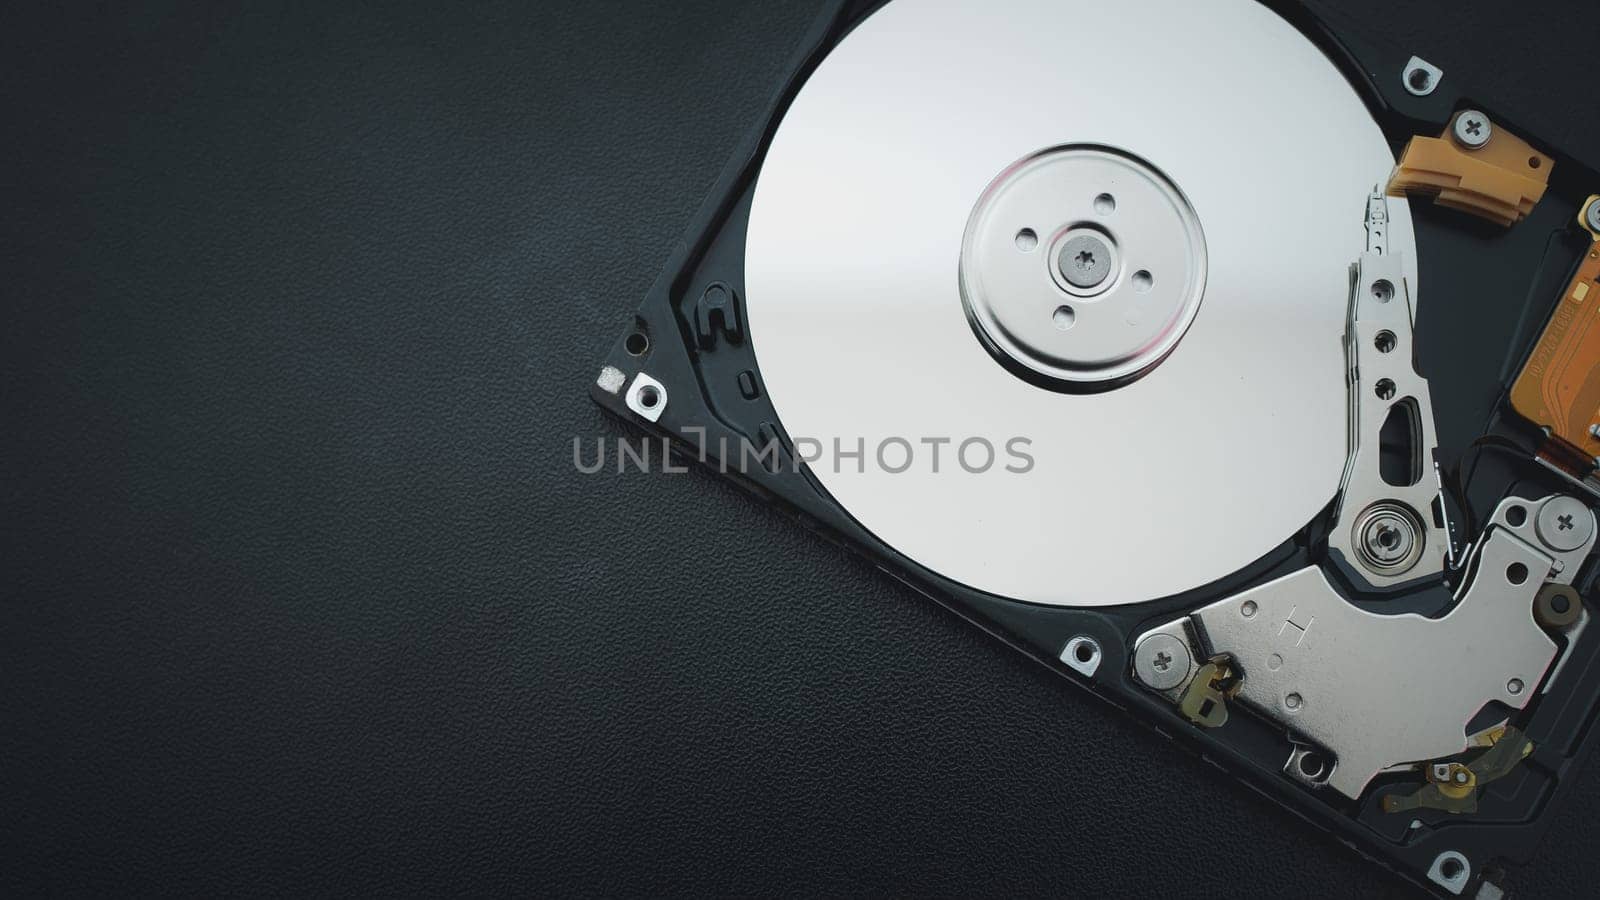 Disassembled open hard disk drive HDD of computer or laptop lies on dark matte surface. Сomputer hardware and equipment. Harddisk data storage. by Unimages2527